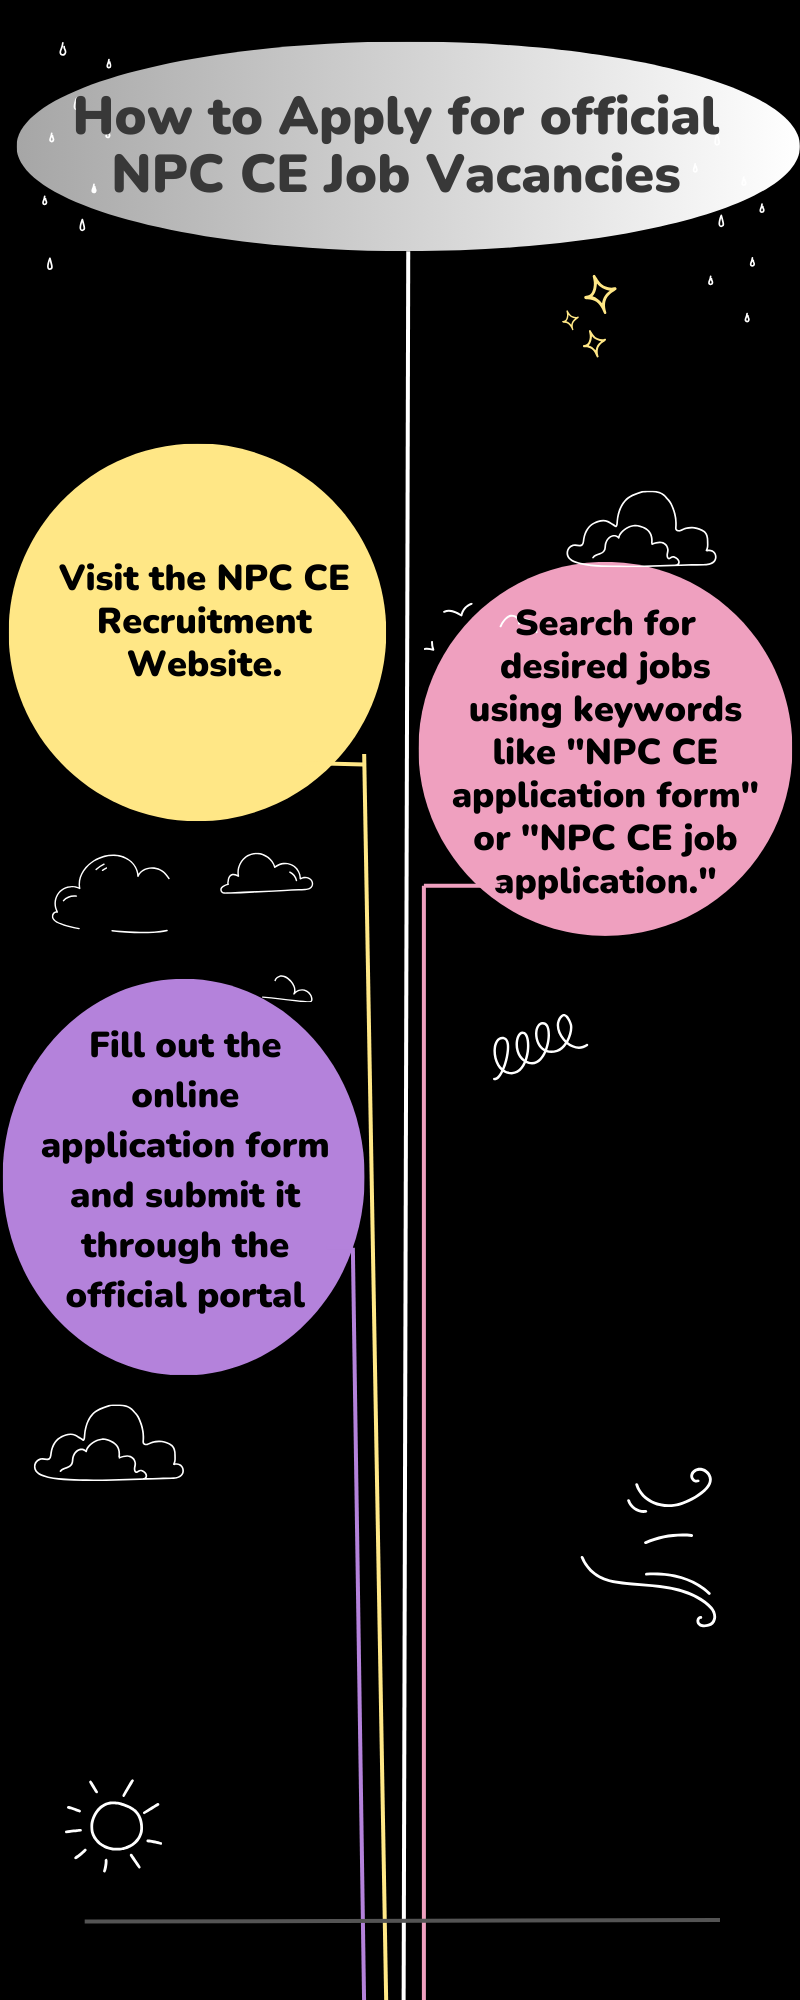 How to Apply for official NPC CE Job Vacancies 